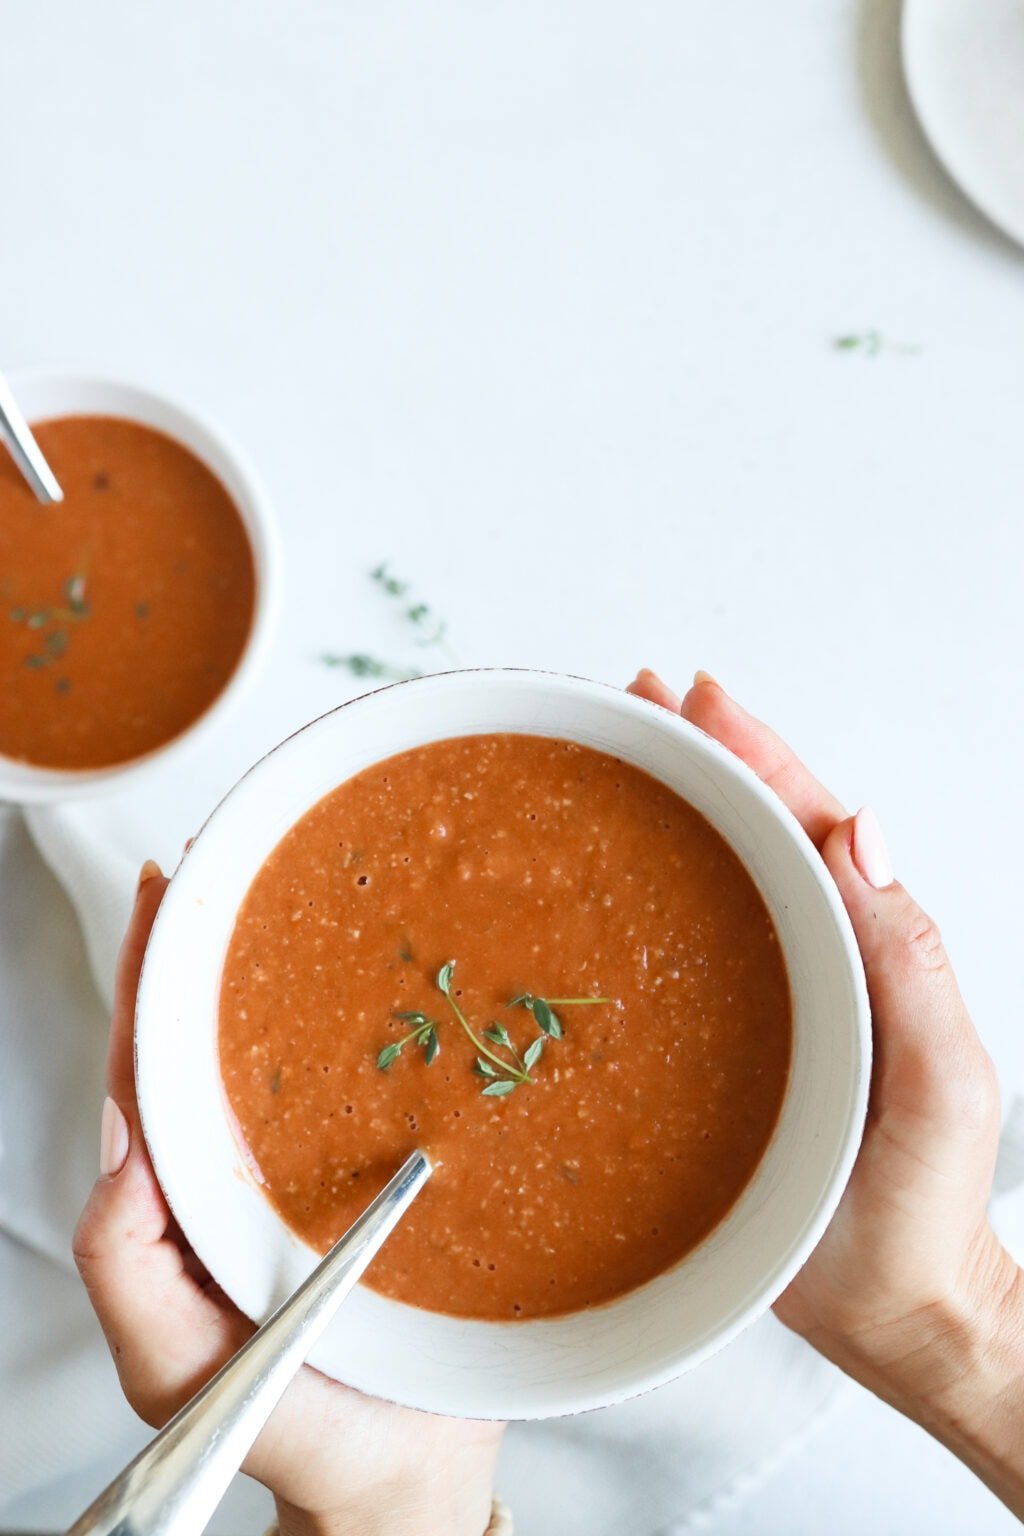 two hands are holding a bowl of roasted tomato soup towards the camera. The soup is in a white bowl and is topped with sprigs of fresh thyme